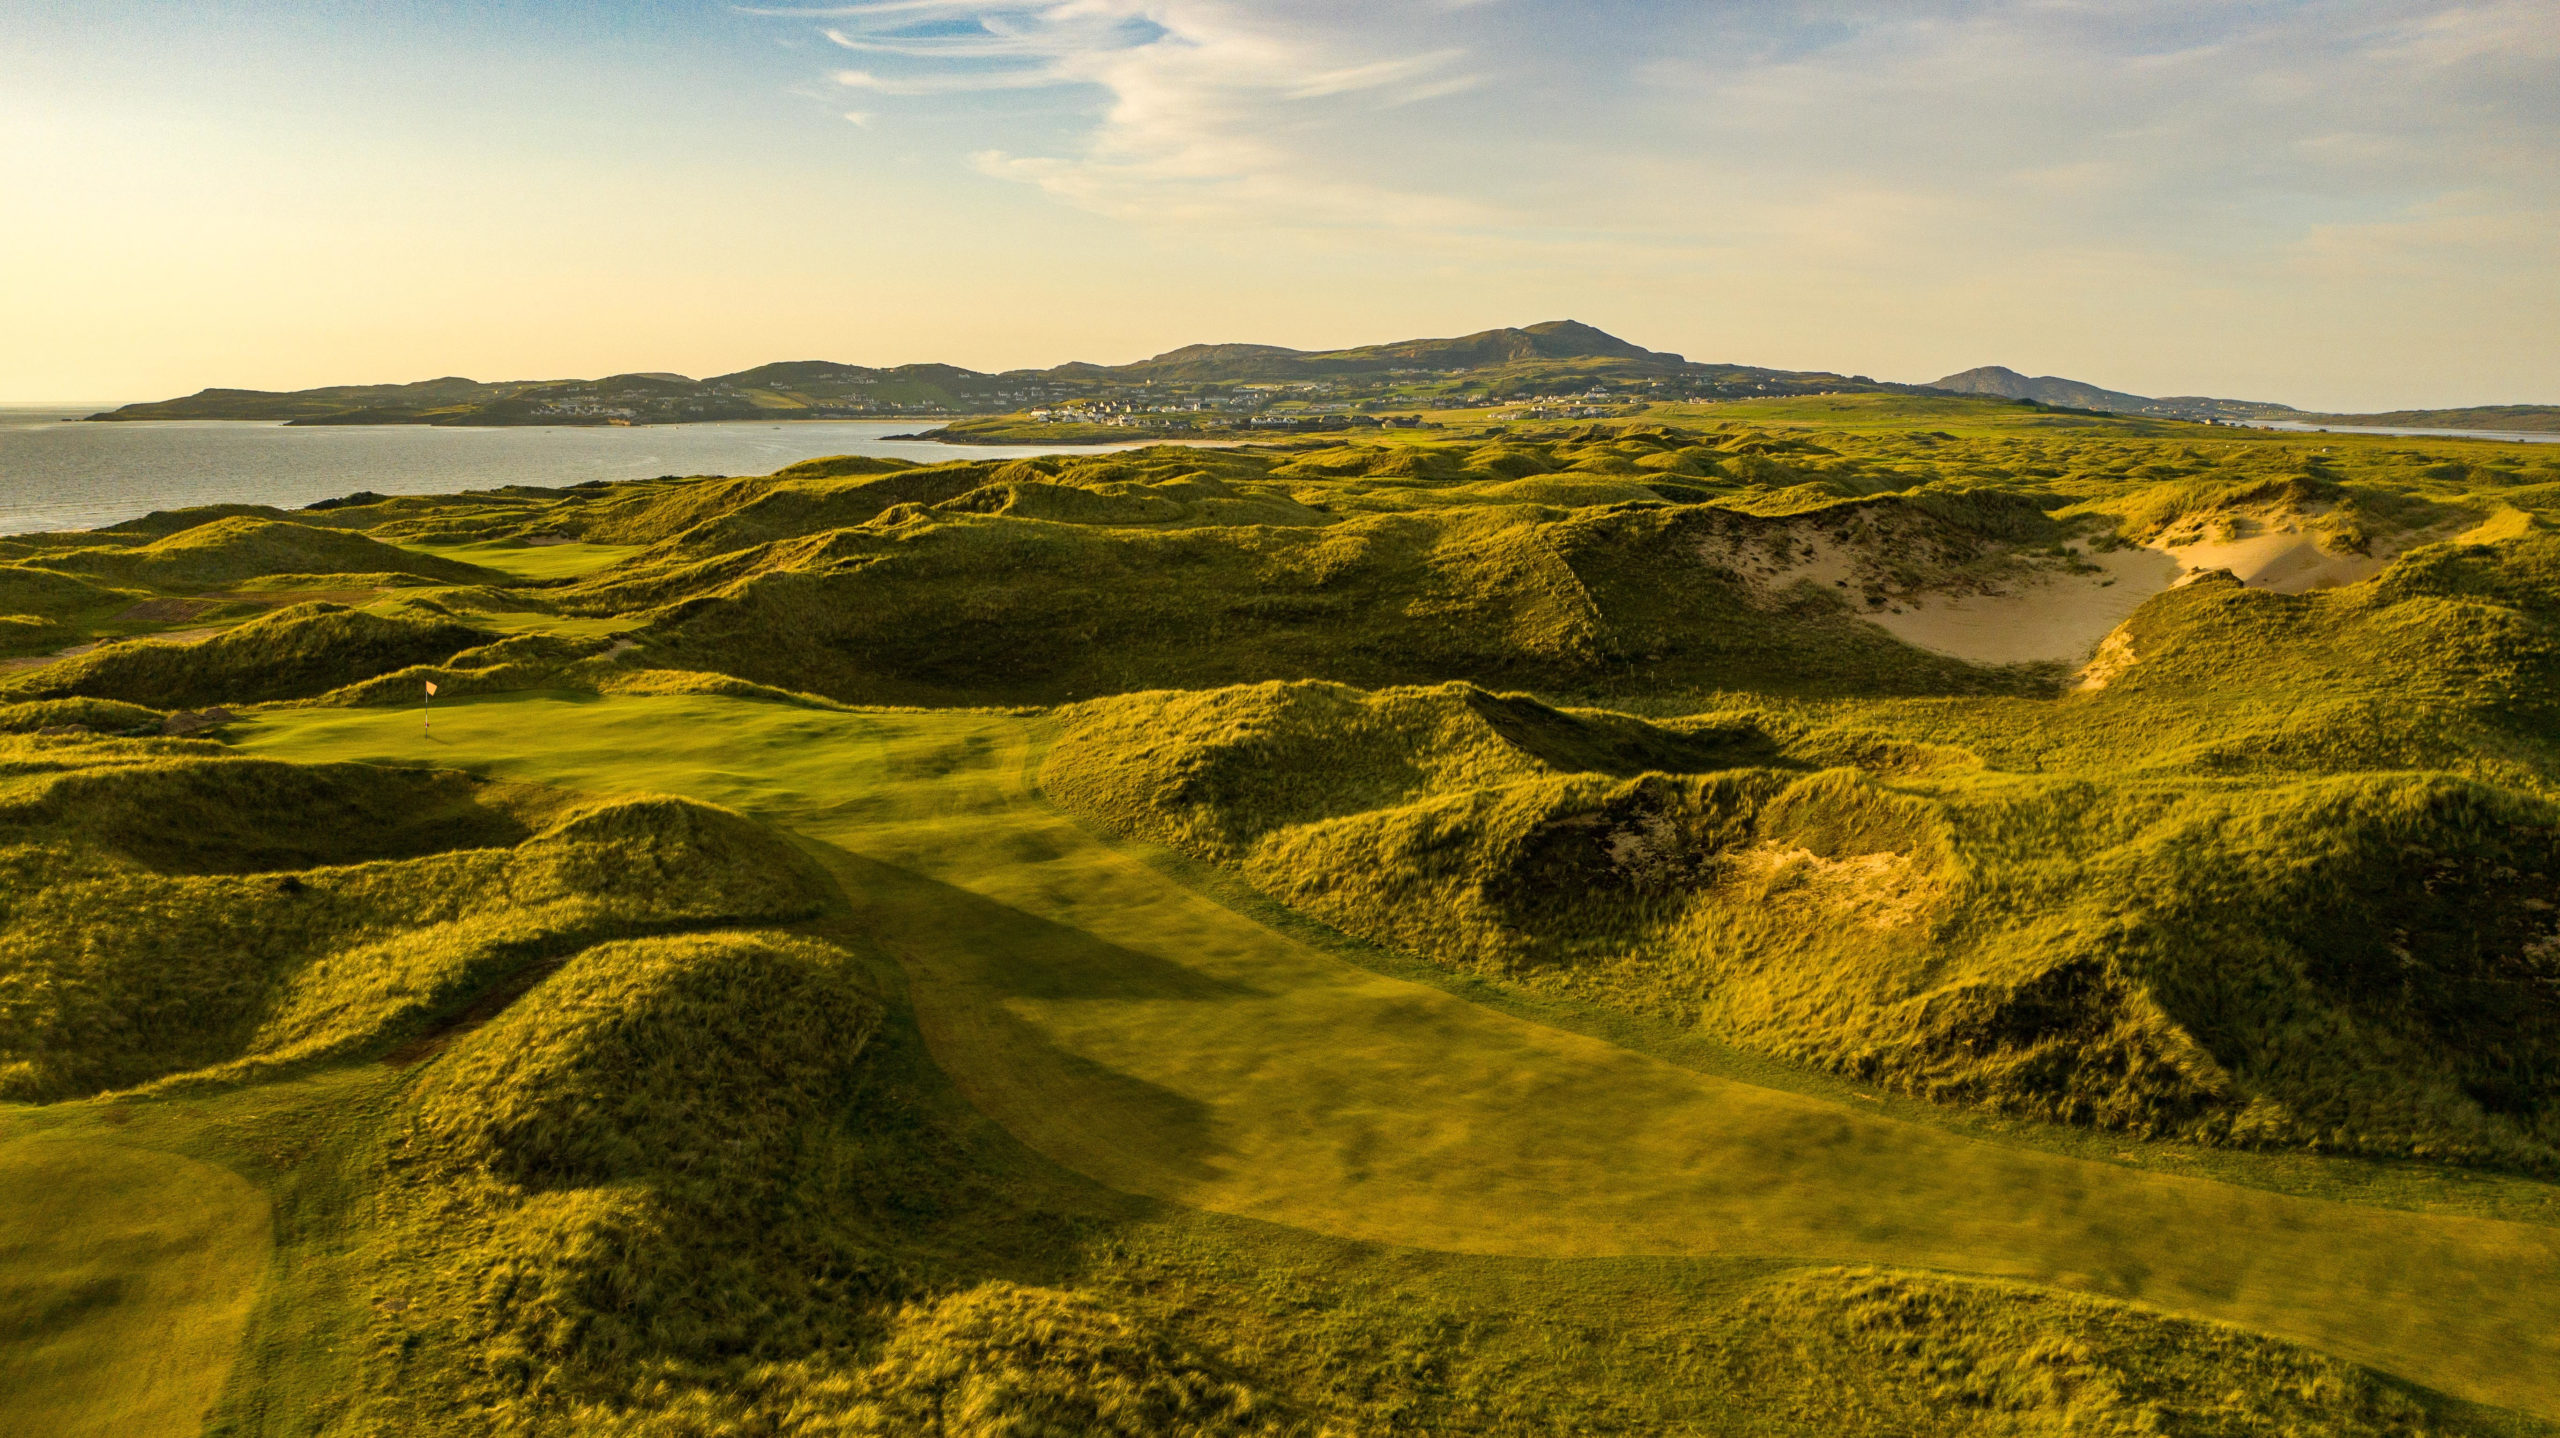 Northwest Ireland | St Patrick's Links at Rosapenna by Clyde Johnson, Cunning Golf Design | The Current State of International Golf Travel - PerryGolf.com